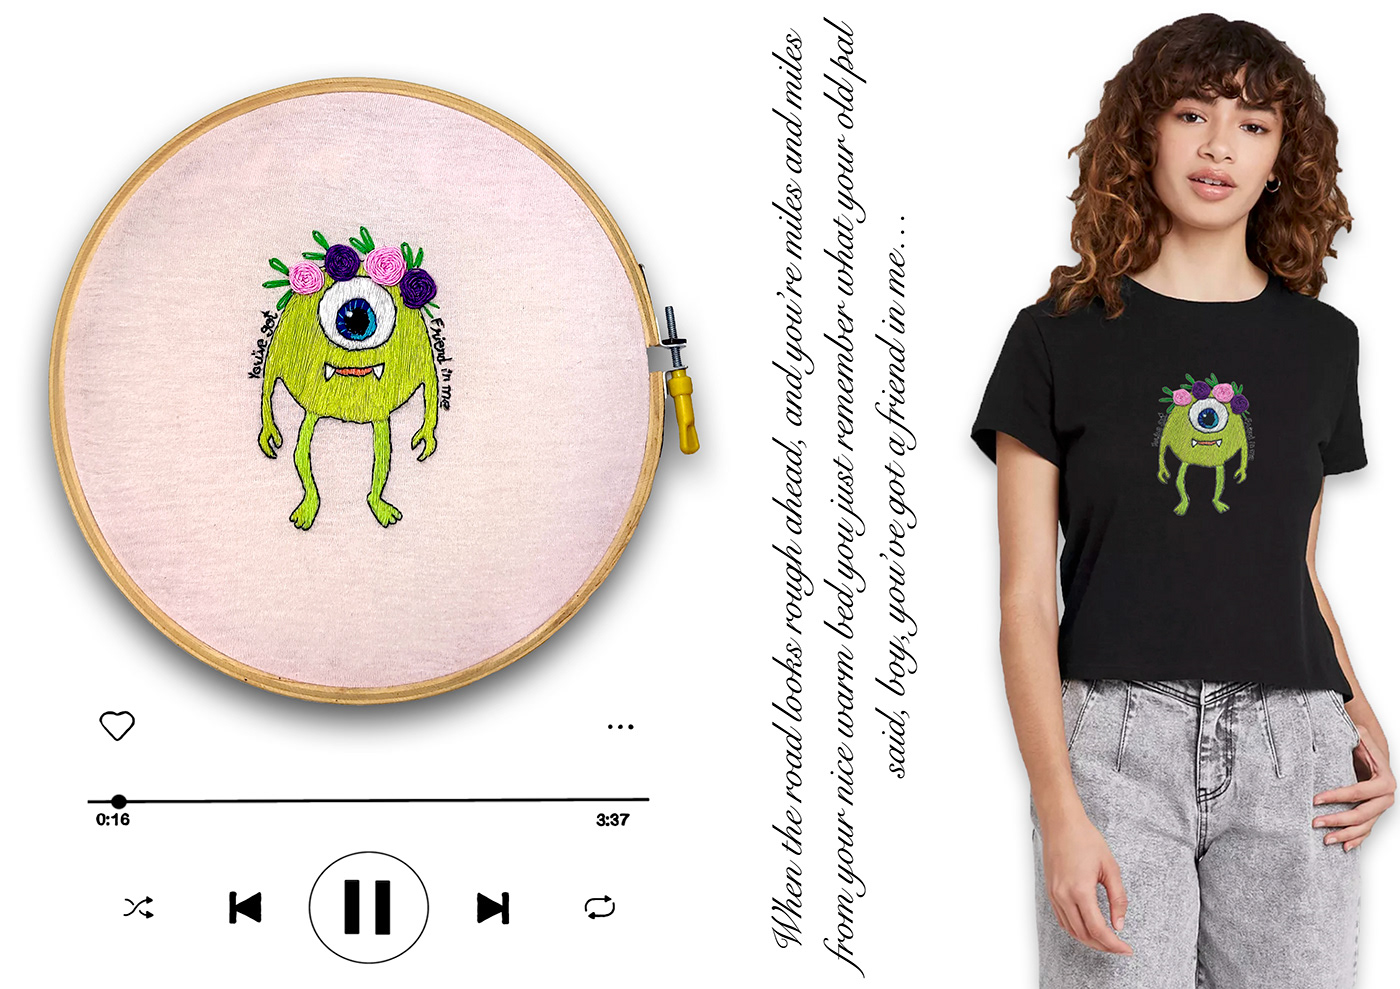 Embroidery songs surface design